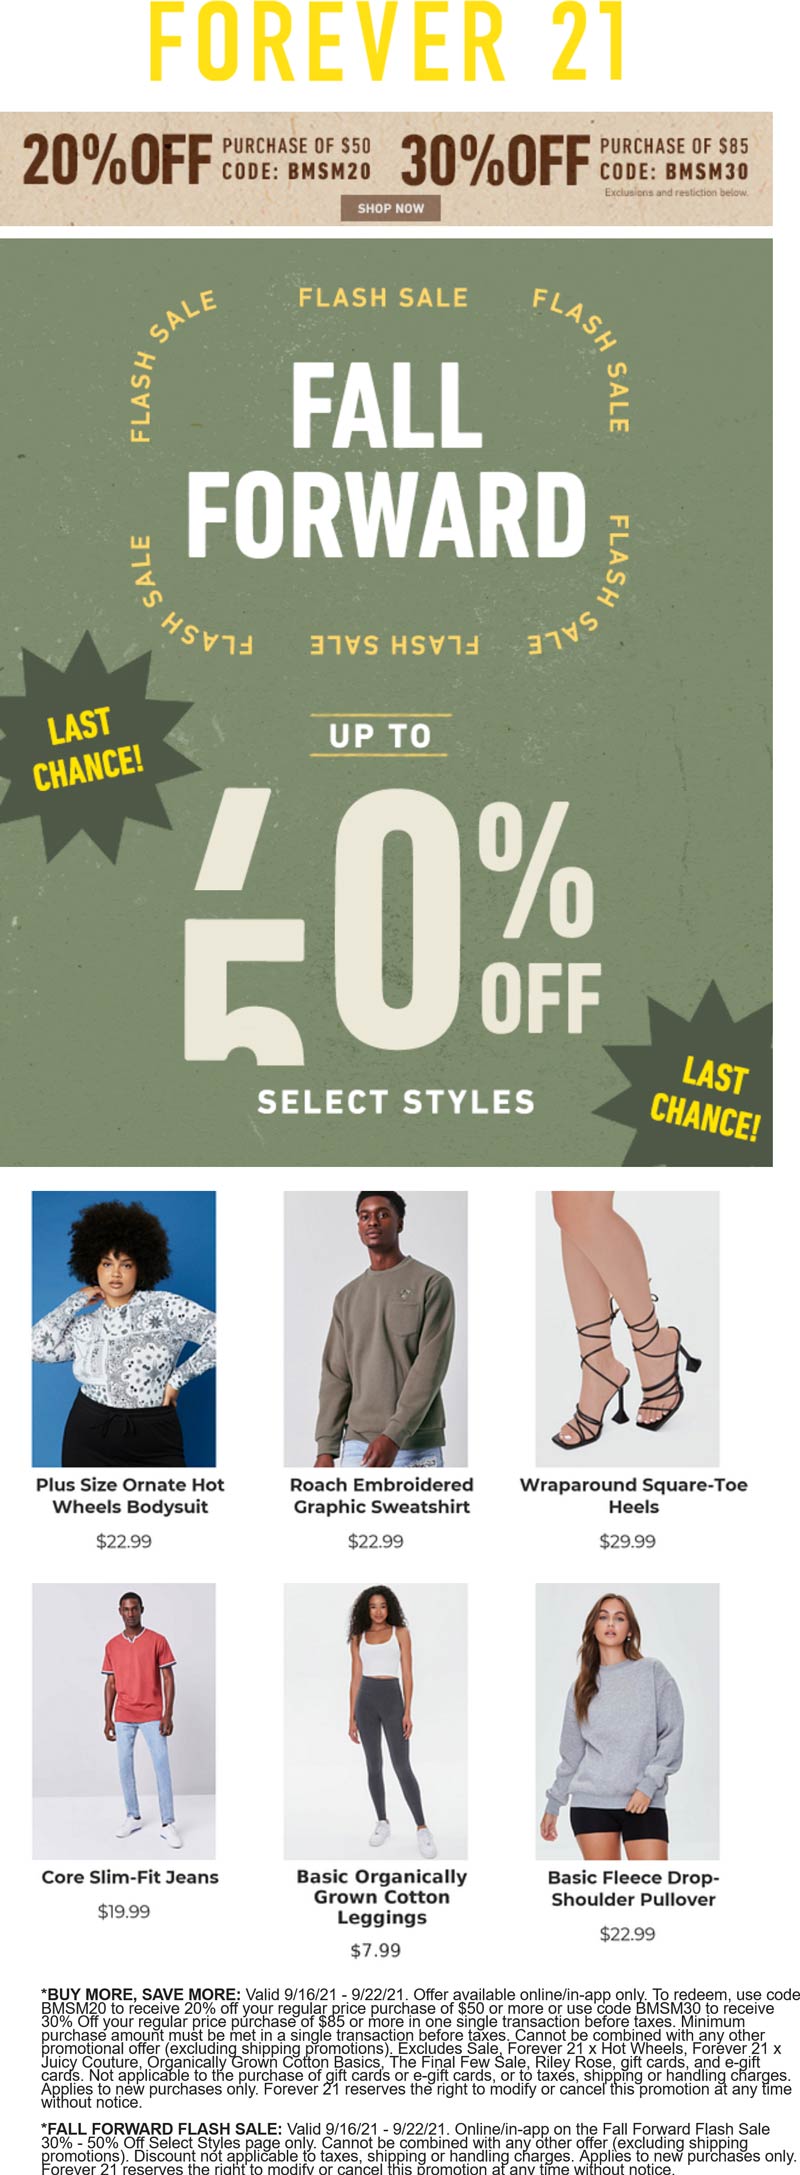 Forever 21 stores Coupon  20-30% off $50+ today online at Forever 21 via promo code BMSM20 #forever21 